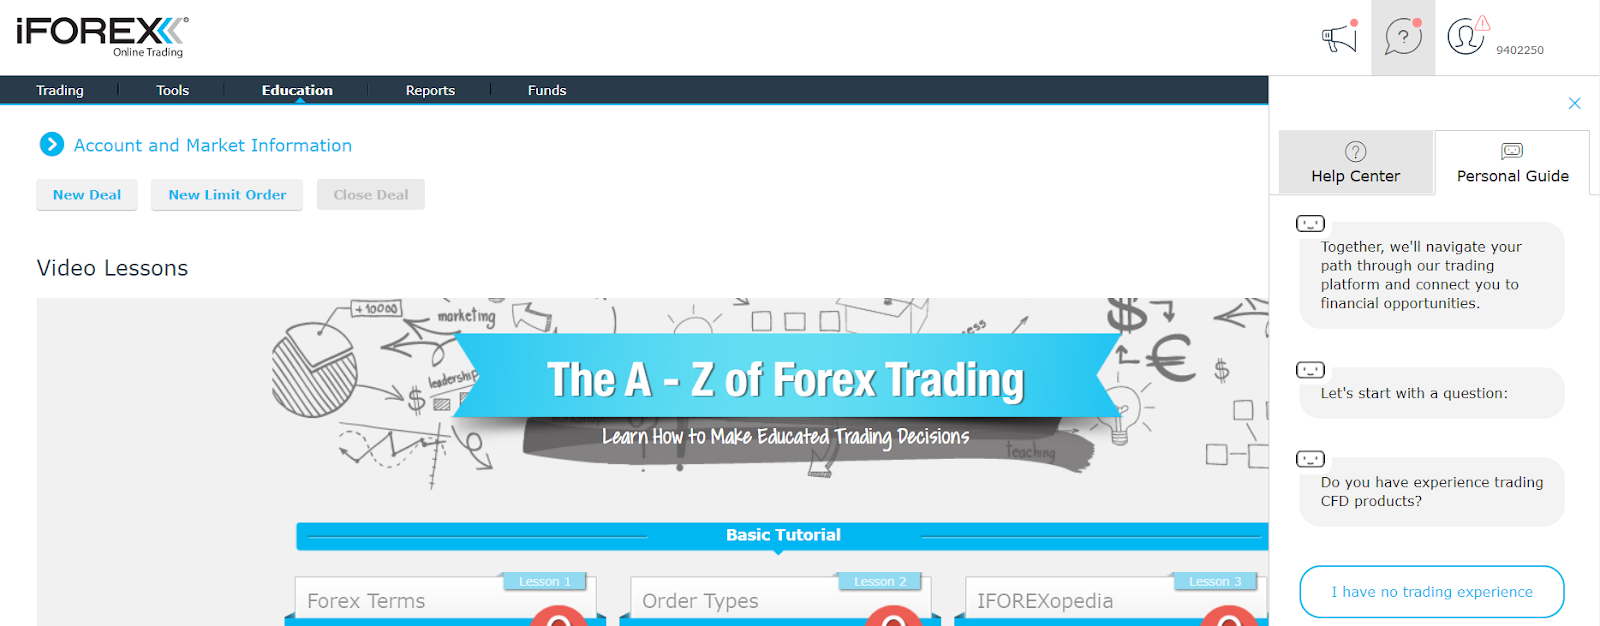 iFOREX review: The A-Z of Forex trading